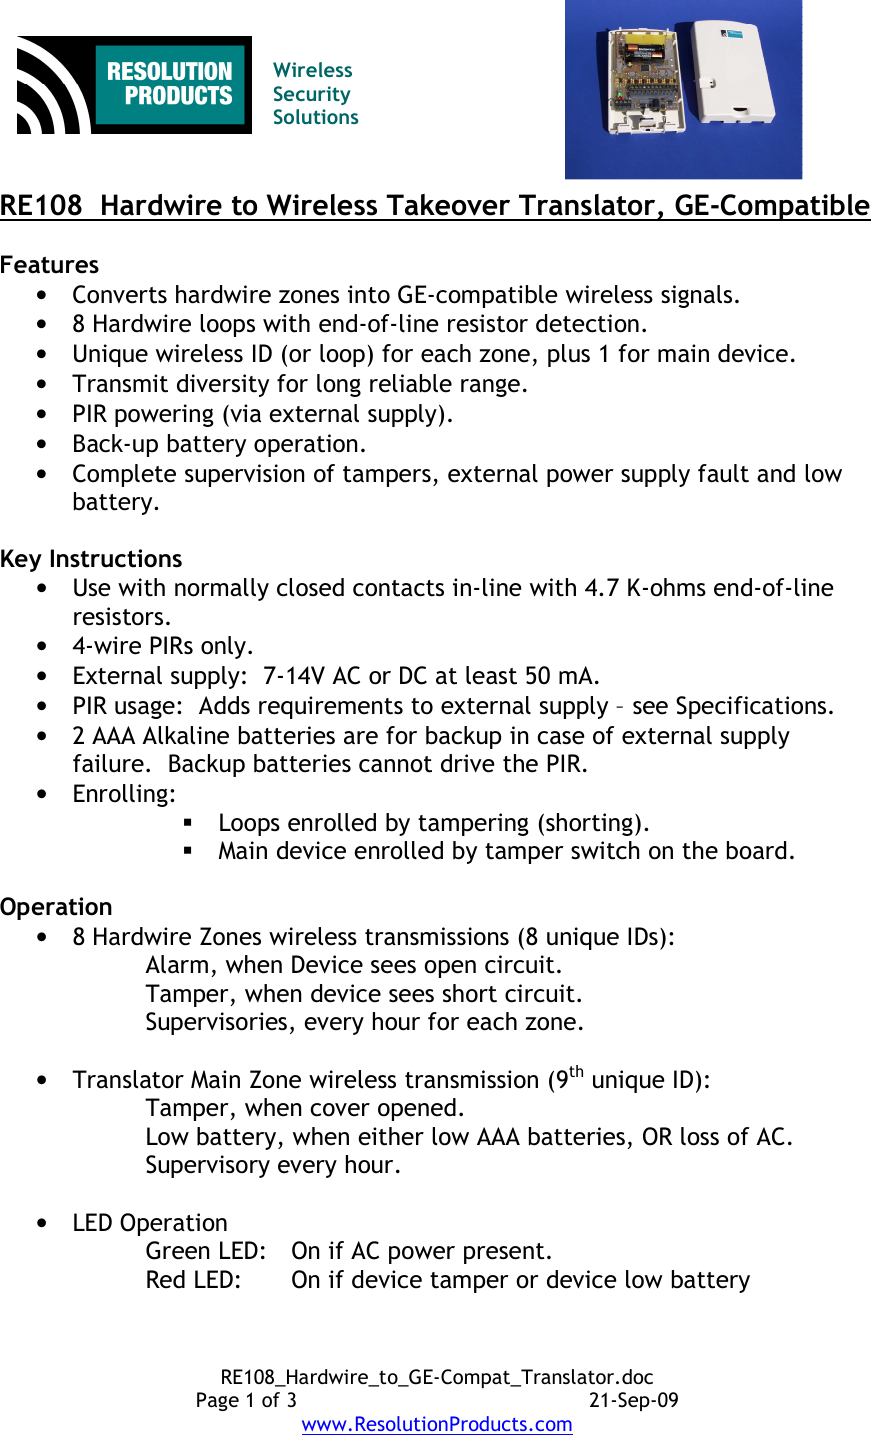 RE108_Hardwire_to_GE-Compat_Translator.doc Page 1 of 3  21-Sep-09 www.ResolutionProducts.com   Wireless  Security  Solutions   RE108  Hardwire to Wireless Takeover Translator, GE-Compatible  Features • Converts hardwire zones into GE-compatible wireless signals. • 8 Hardwire loops with end-of-line resistor detection. • Unique wireless ID (or loop) for each zone, plus 1 for main device. • Transmit diversity for long reliable range. • PIR powering (via external supply). • Back-up battery operation. • Complete supervision of tampers, external power supply fault and low battery.  Key Instructions • Use with normally closed contacts in-line with 4.7 K-ohms end-of-line resistors. • 4-wire PIRs only. • External supply:  7-14V AC or DC at least 50 mA. • PIR usage:  Adds requirements to external supply – see Specifications. • 2 AAA Alkaline batteries are for backup in case of external supply failure.  Backup batteries cannot drive the PIR. • Enrolling:  Loops enrolled by tampering (shorting).  Main device enrolled by tamper switch on the board.  Operation • 8 Hardwire Zones wireless transmissions (8 unique IDs): Alarm, when Device sees open circuit. Tamper, when device sees short circuit. Supervisories, every hour for each zone.  • Translator Main Zone wireless transmission (9th unique ID): Tamper, when cover opened. Low battery, when either low AAA batteries, OR loss of AC. Supervisory every hour.  • LED Operation Green LED:  On if AC power present. Red LED:  On if device tamper or device low battery 